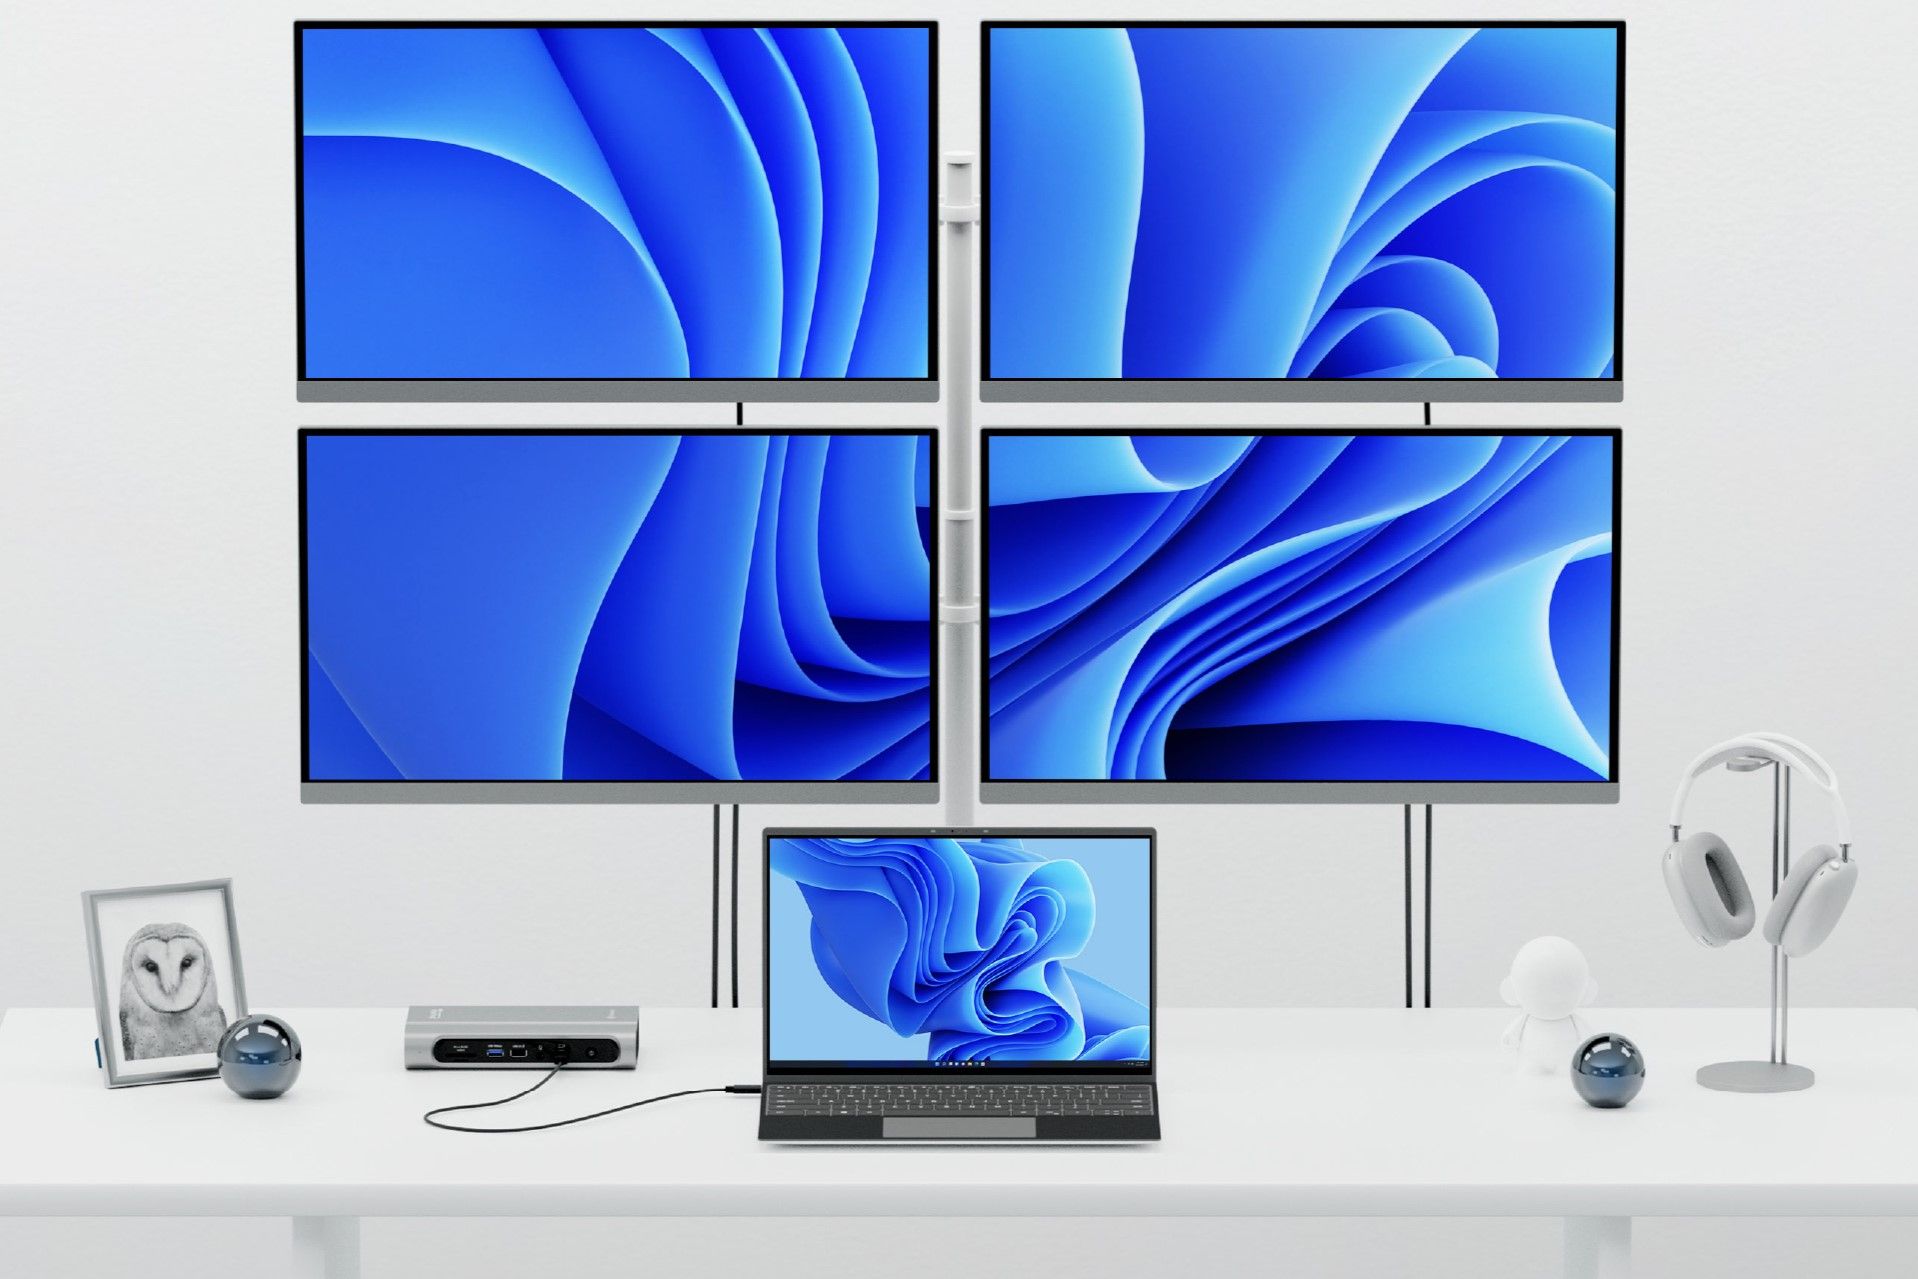 A laptop on a desk, connected to a docking station, which is connected to four displays on the wall behind the desk